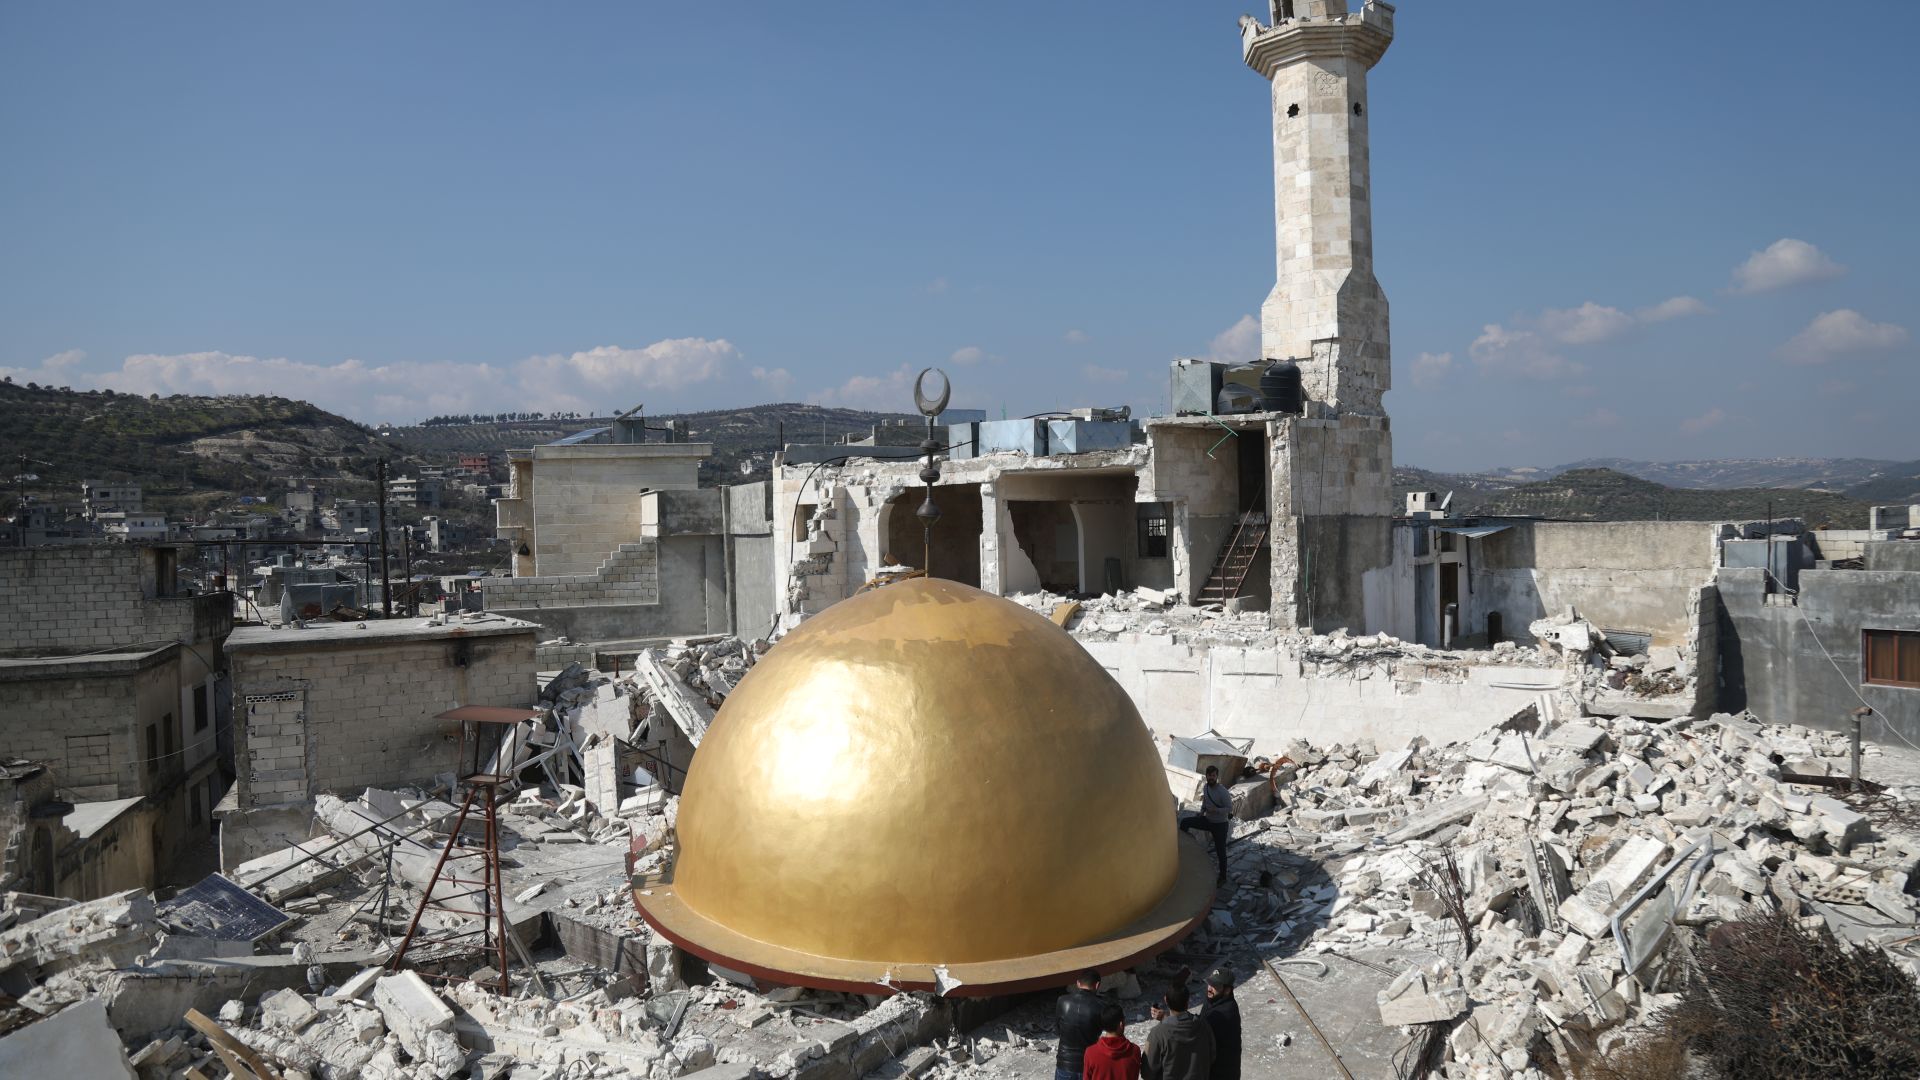 The Maland mosque's dome fallen on the ground after the earthquake destroyed the structure